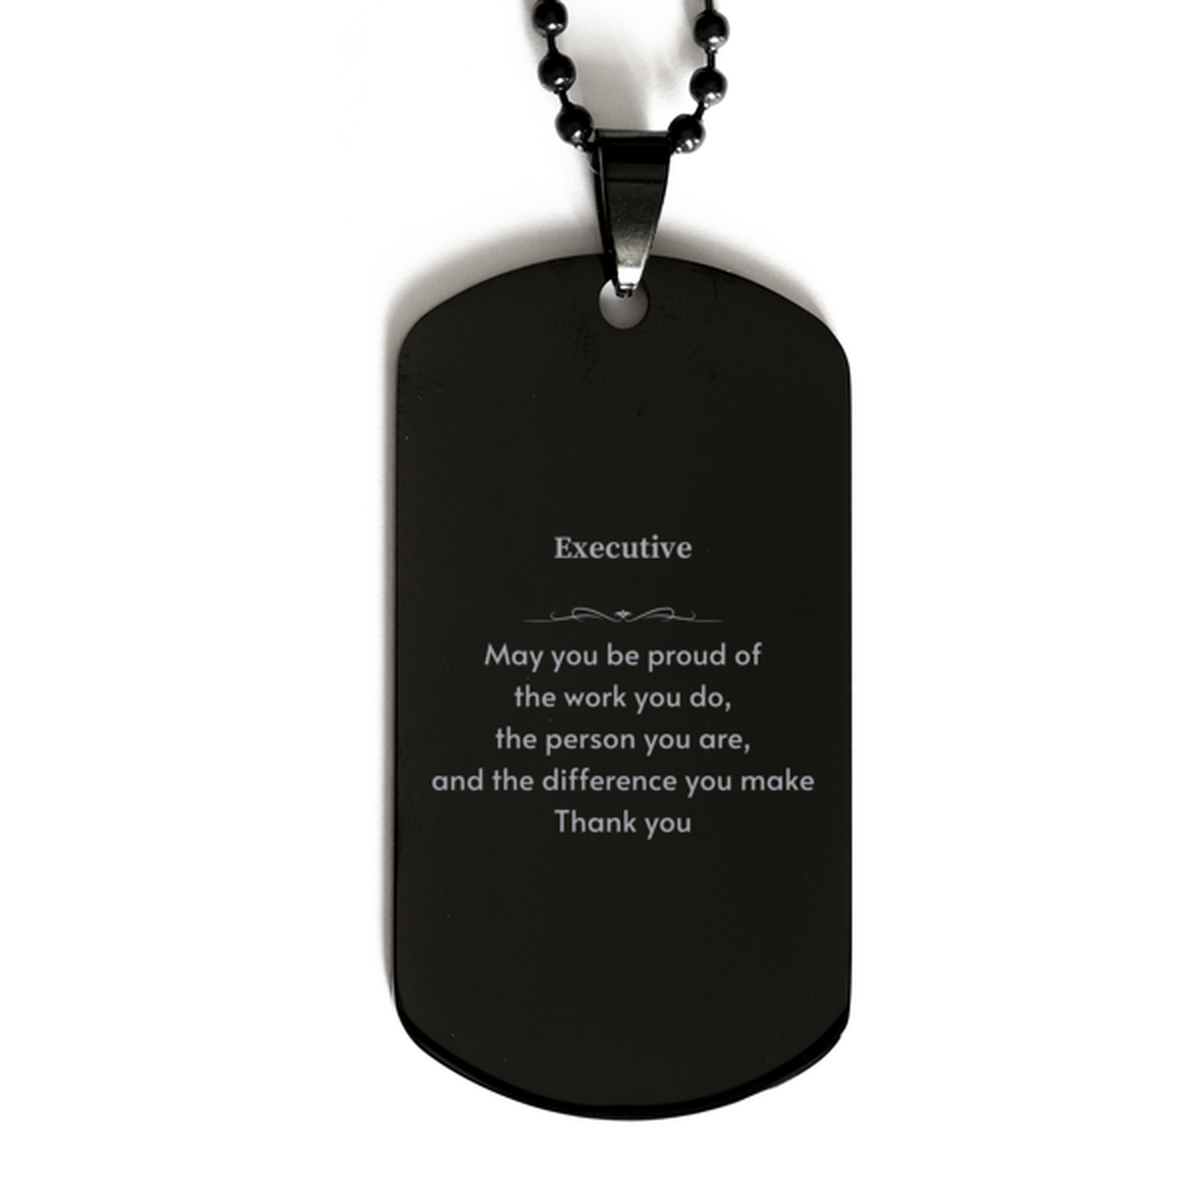 Heartwarming Black Dog Tag Retirement Coworkers Gifts for Executive, Executive May You be proud of the work you do, the person you are Gifts for Boss Men Women Friends